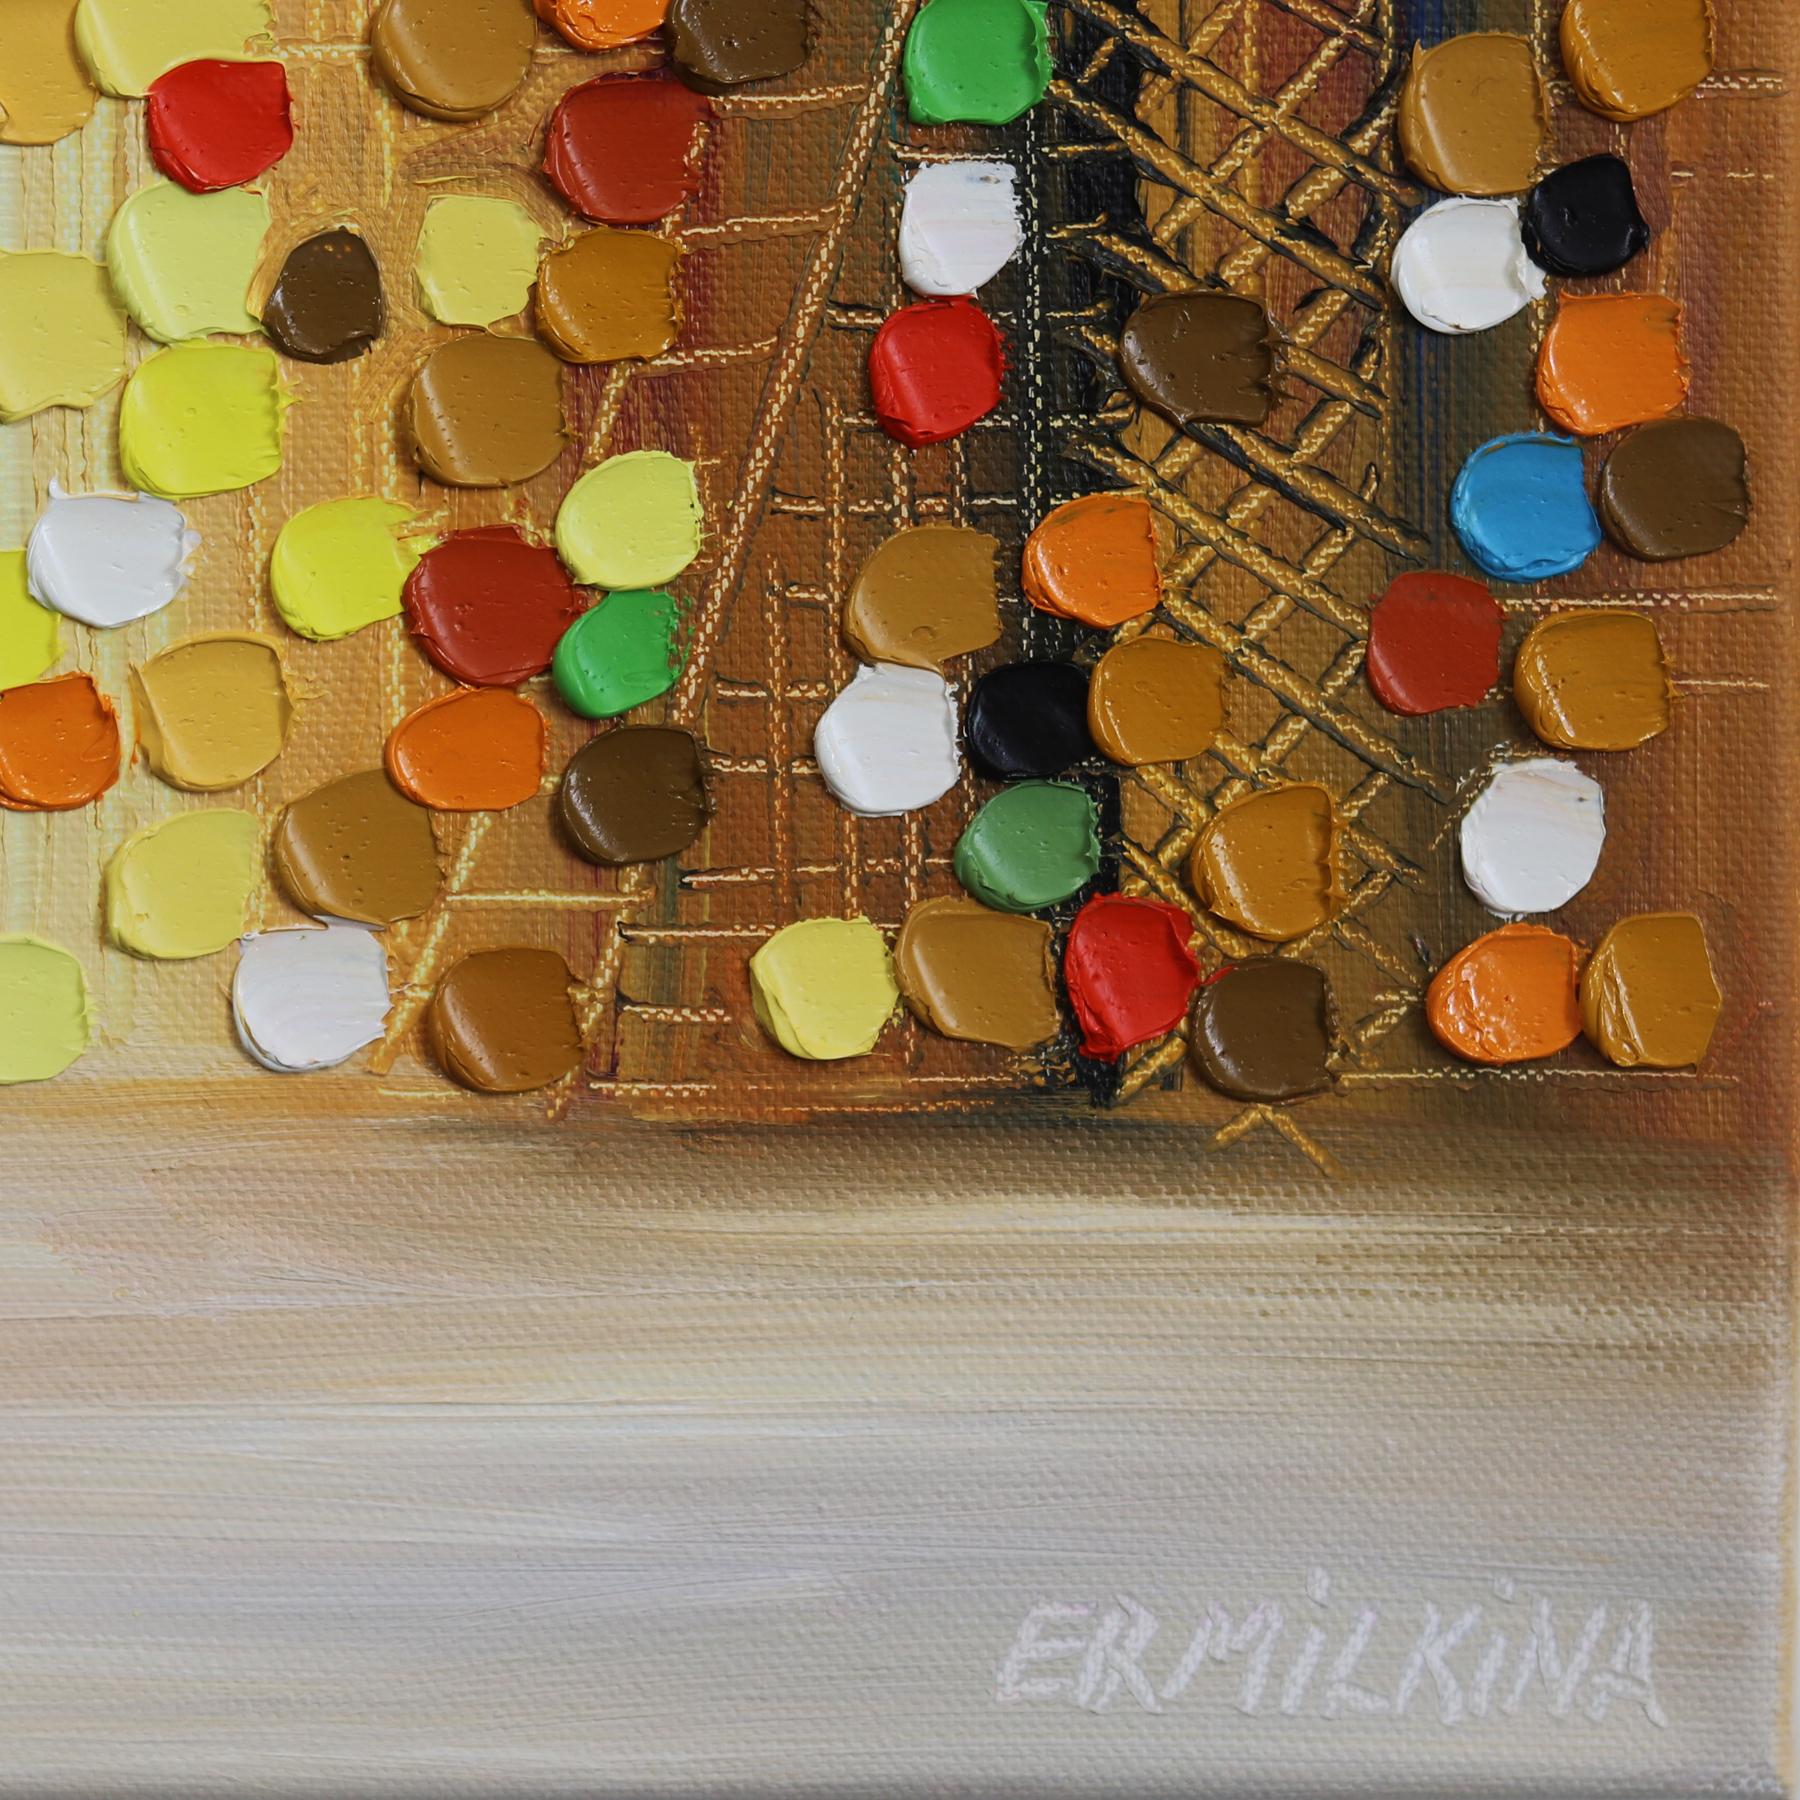 Ekaterina Ermilkina’s original, abstract fine art paintings are created using a skillful combination of applying and removing oil paint with a palette knife on canvas. Her inspirations are the skylines of big cities like Manhattan, Philadelphia, or